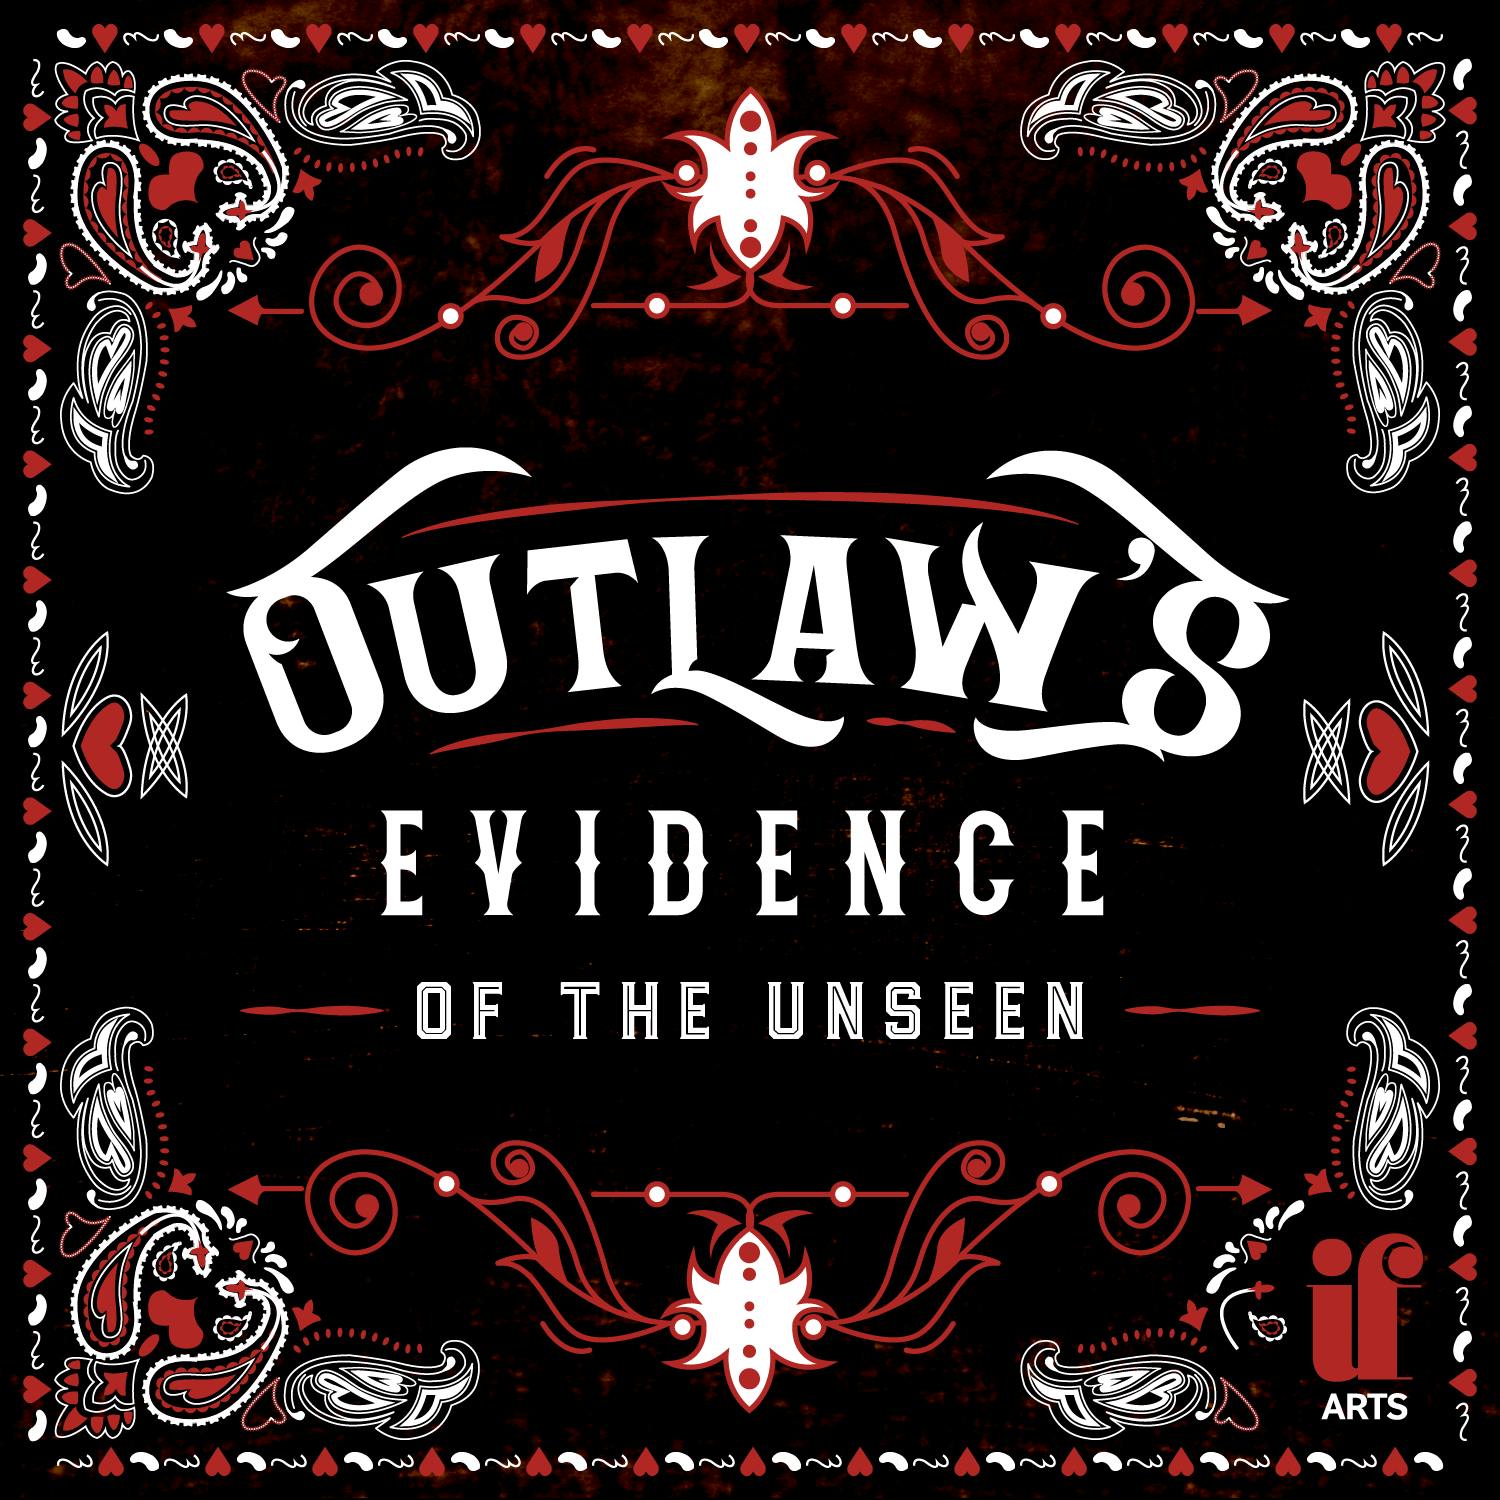 Outlaw's Evidence of the Unseen